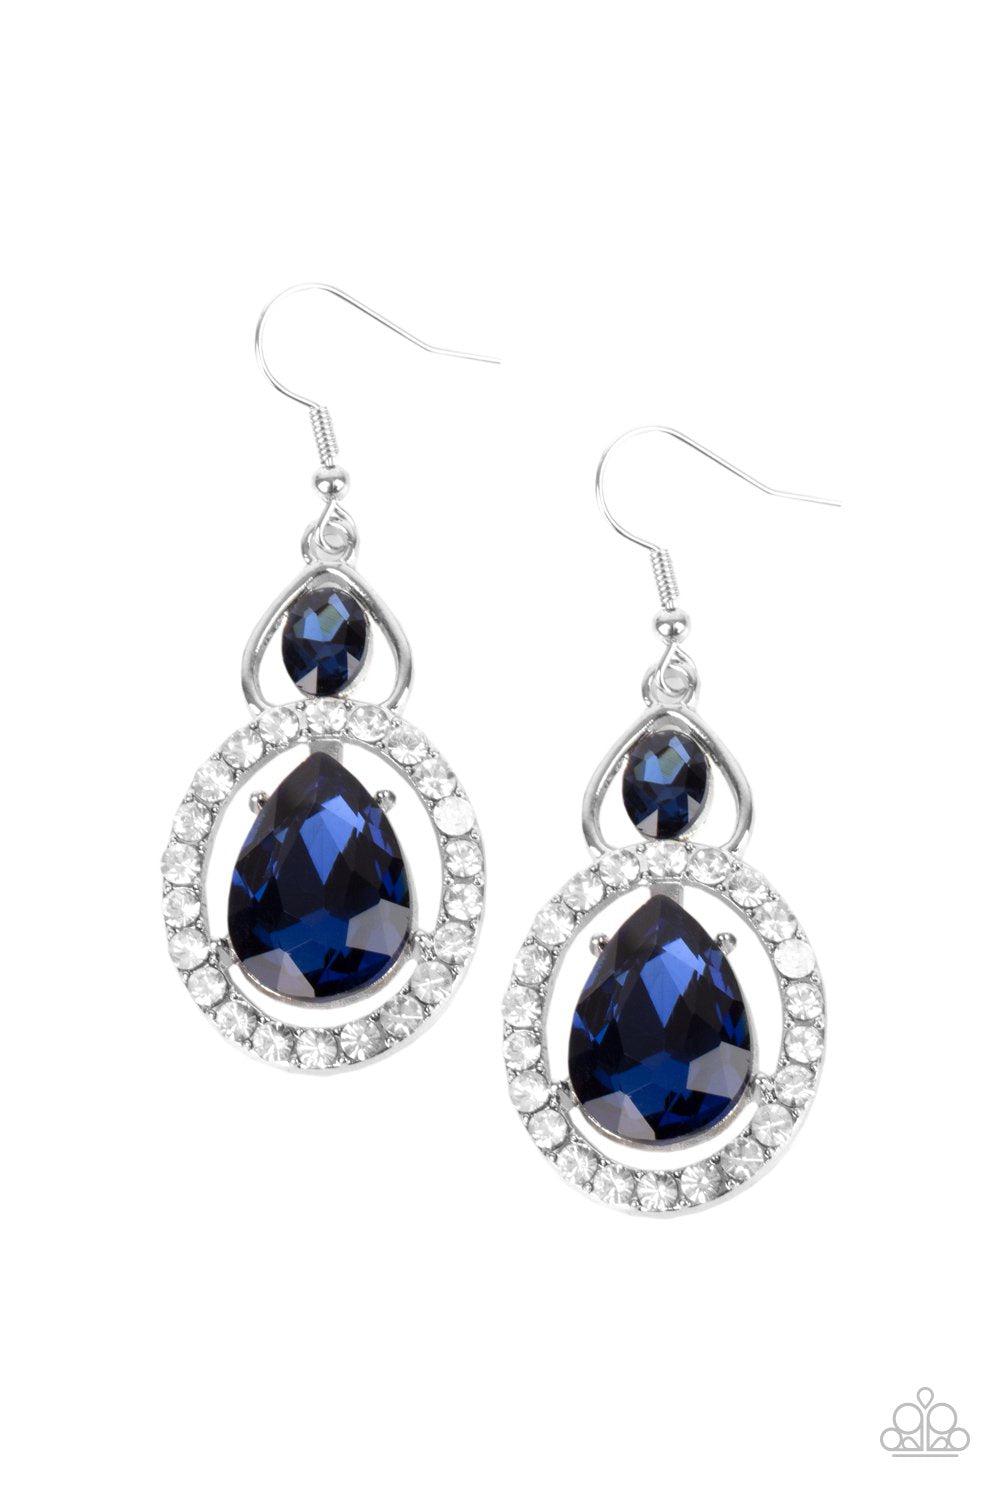 Double The Drama Blue and White Rhinestone Earrings - Paparazzi Accessories- lightbox - CarasShop.com - $5 Jewelry by Cara Jewels